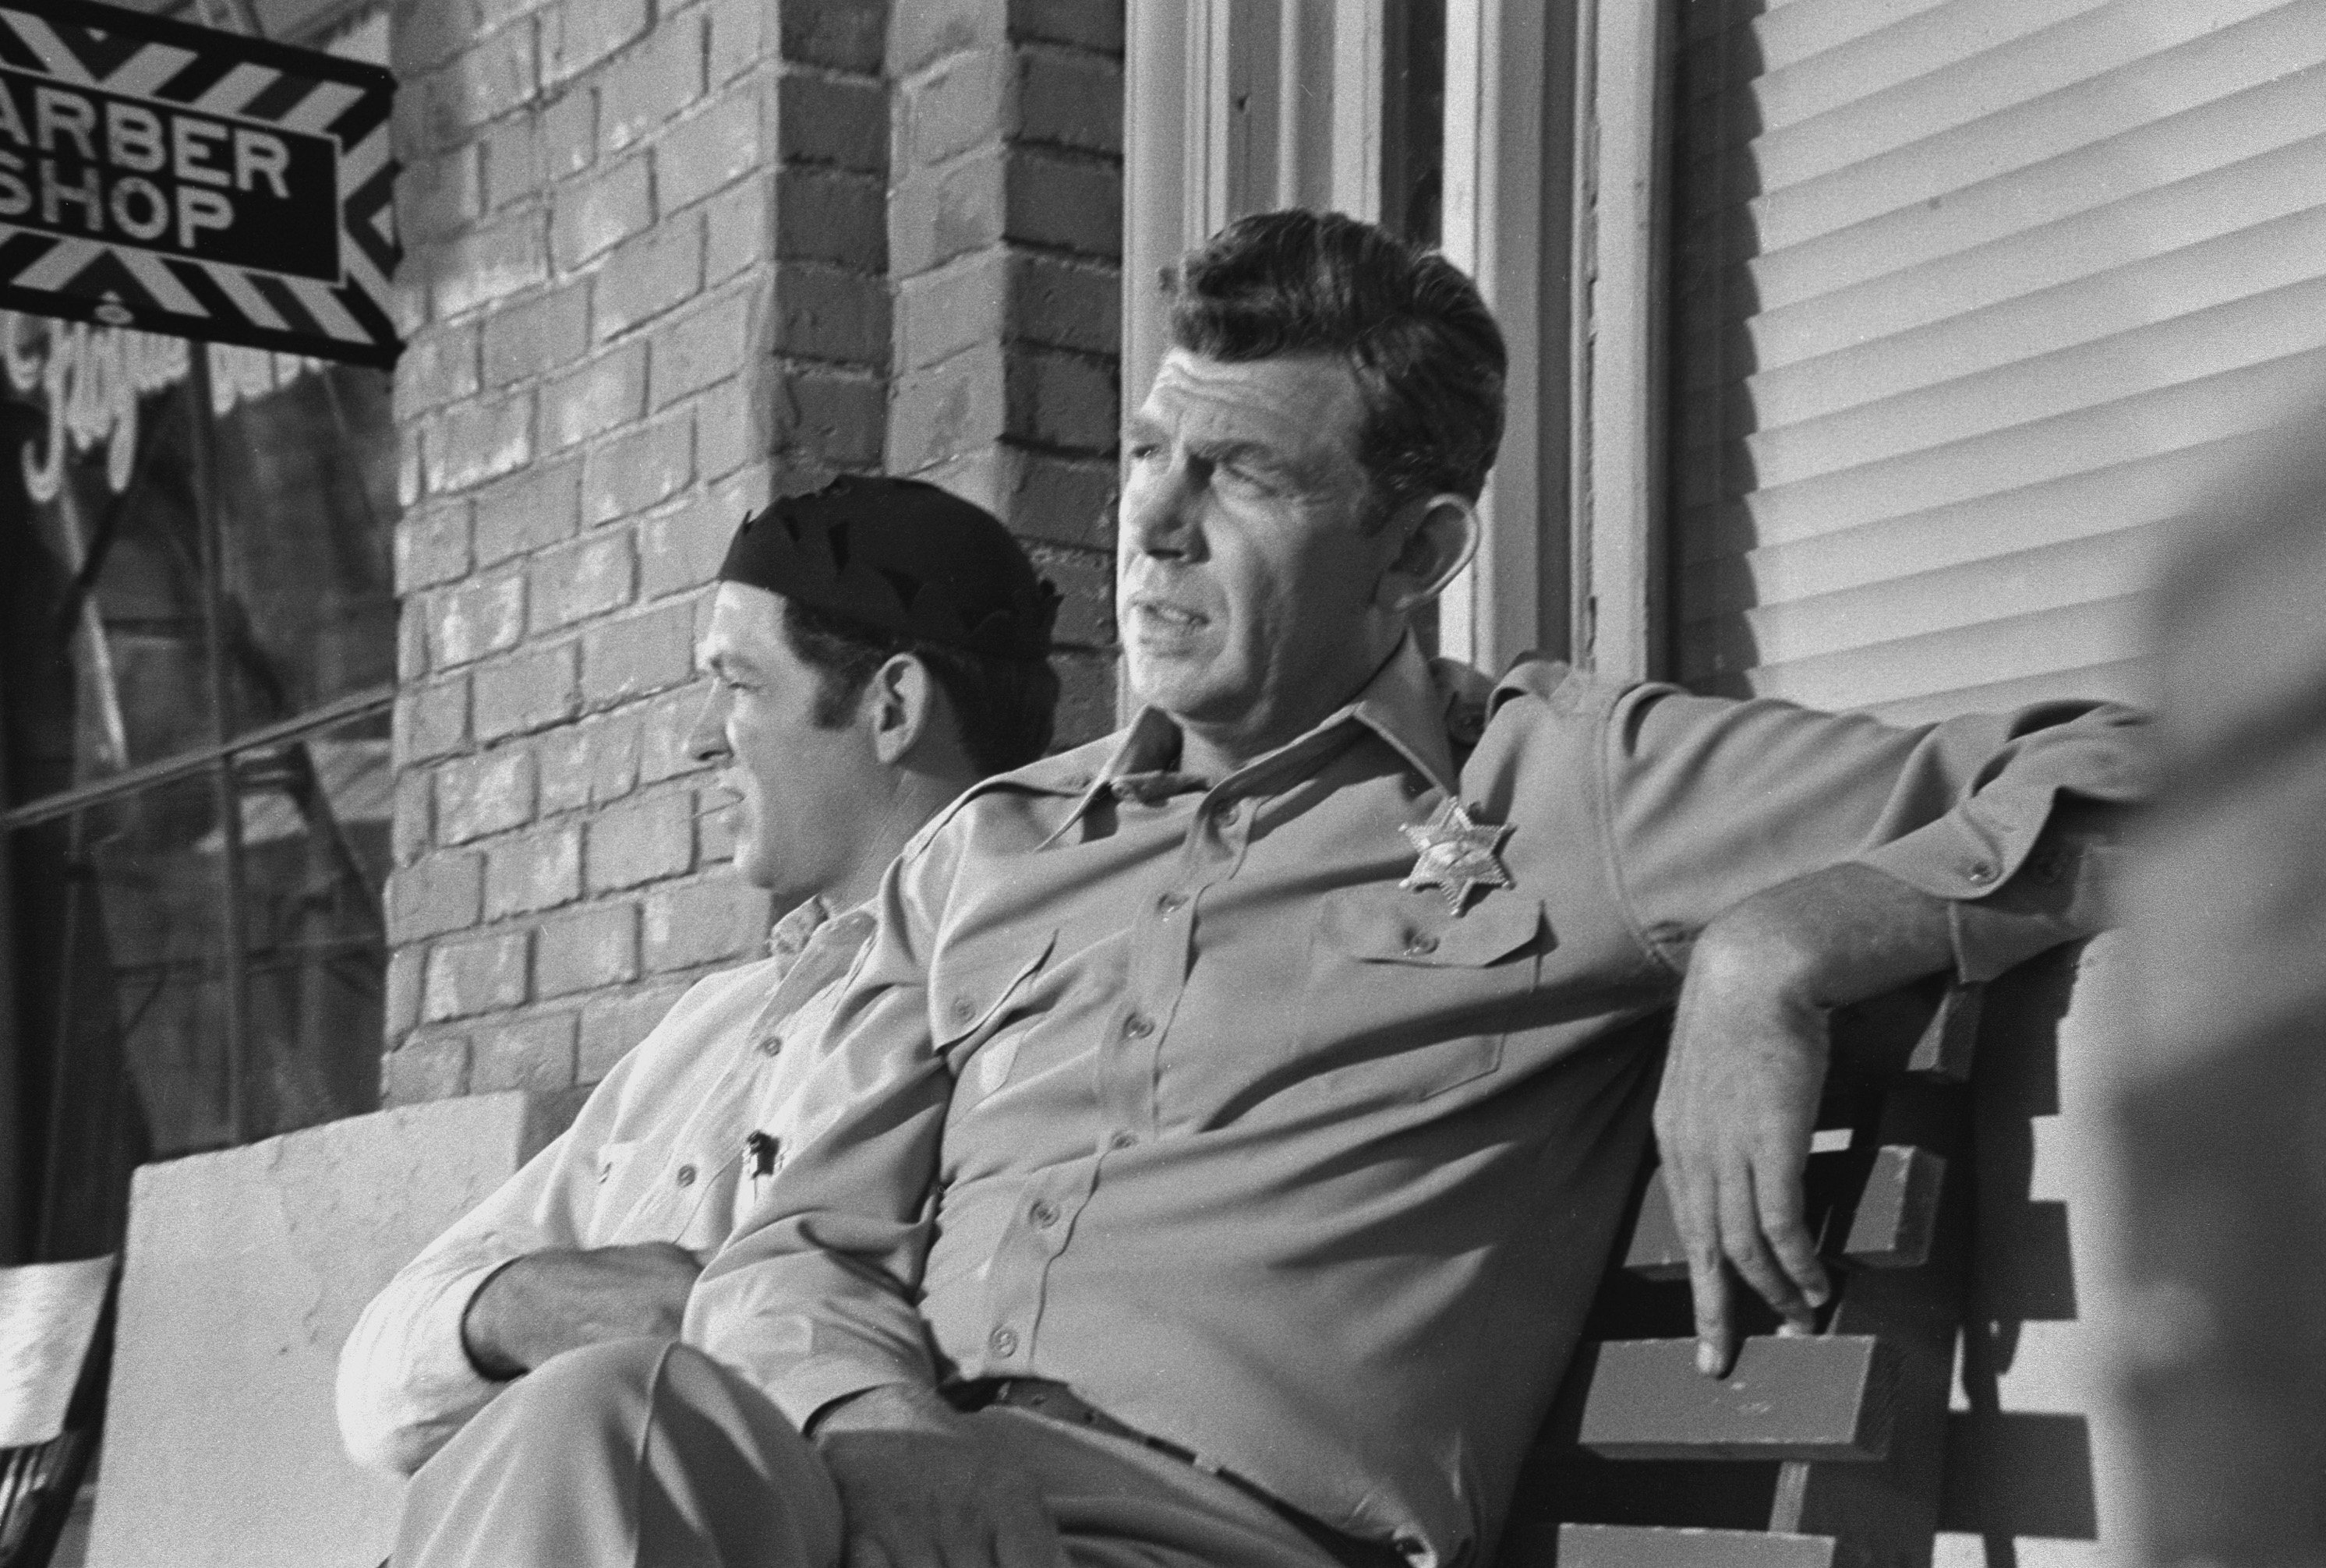 Left to right: George Lindsey with Andy Griffith